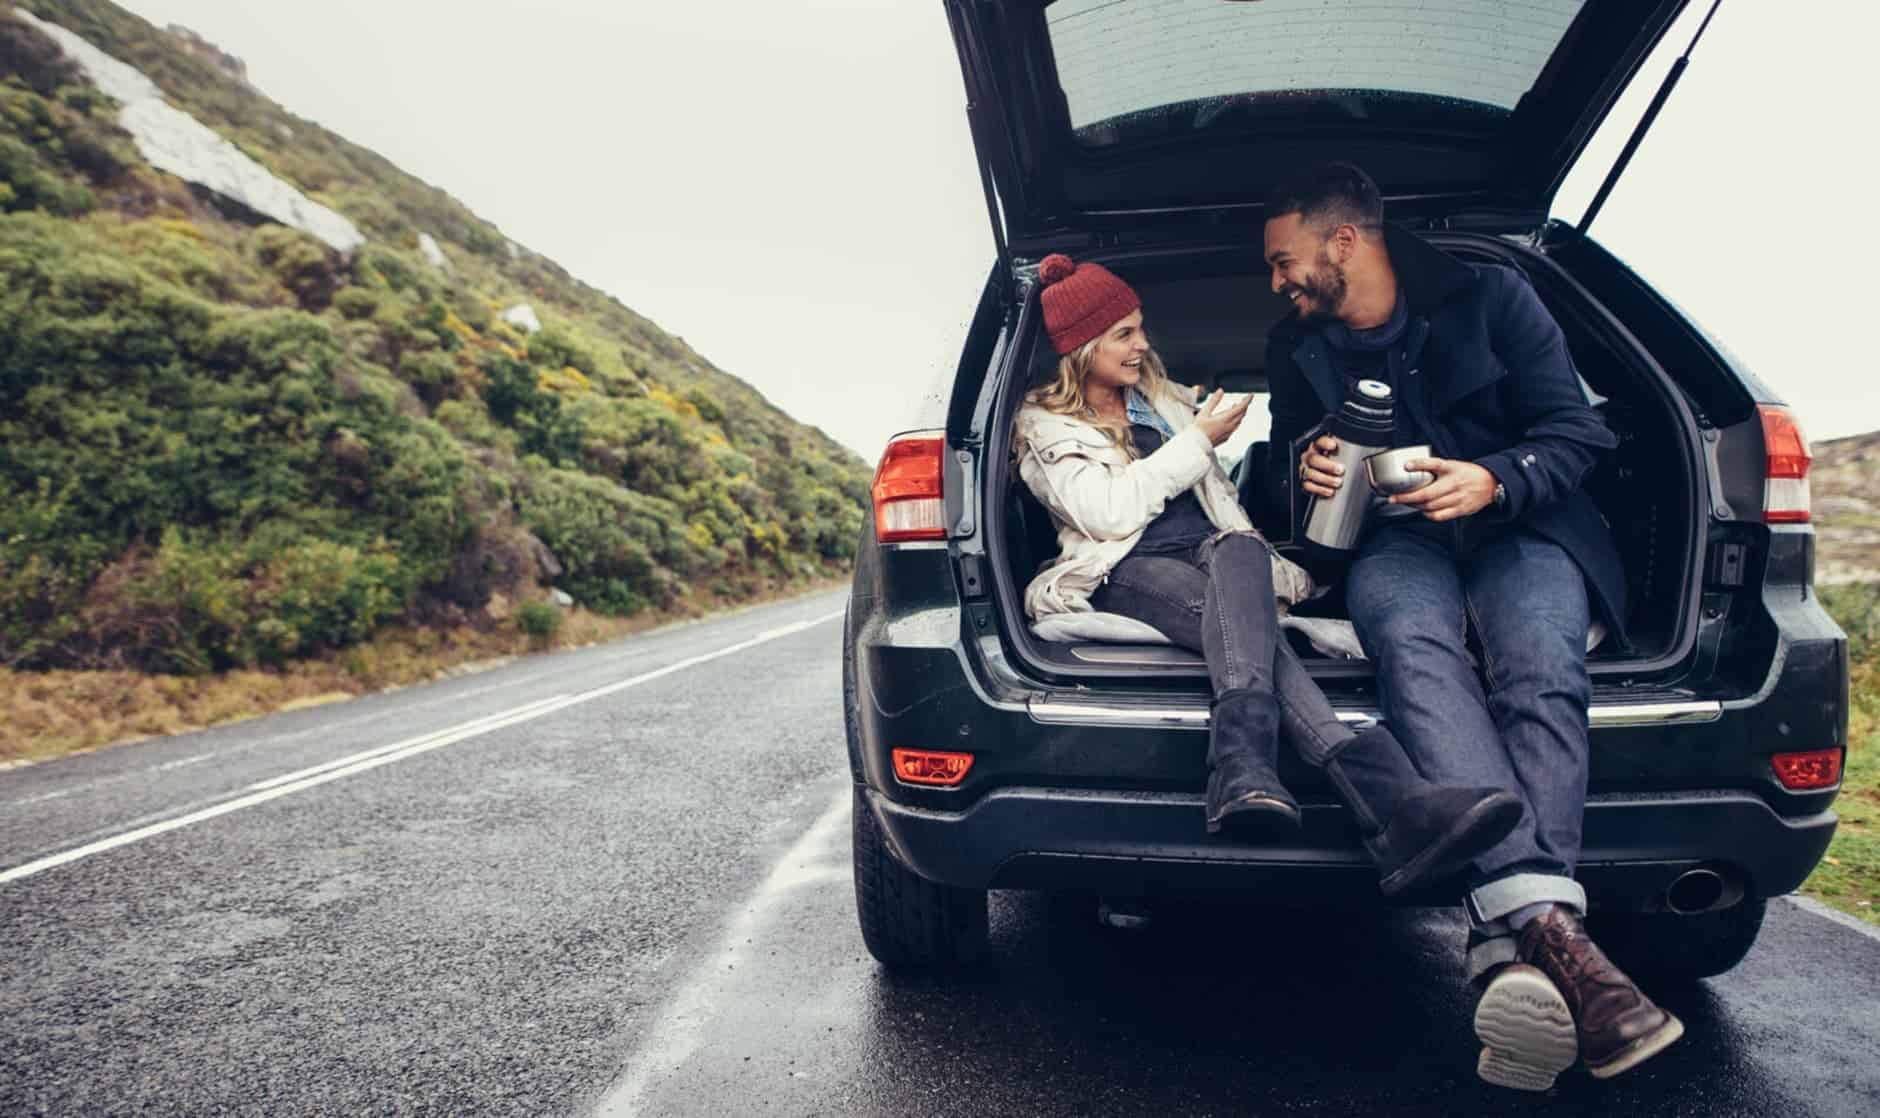 A man and a woman laughing in the boot of their car, enjoying a hot drink whilst parked on the side of a country road.